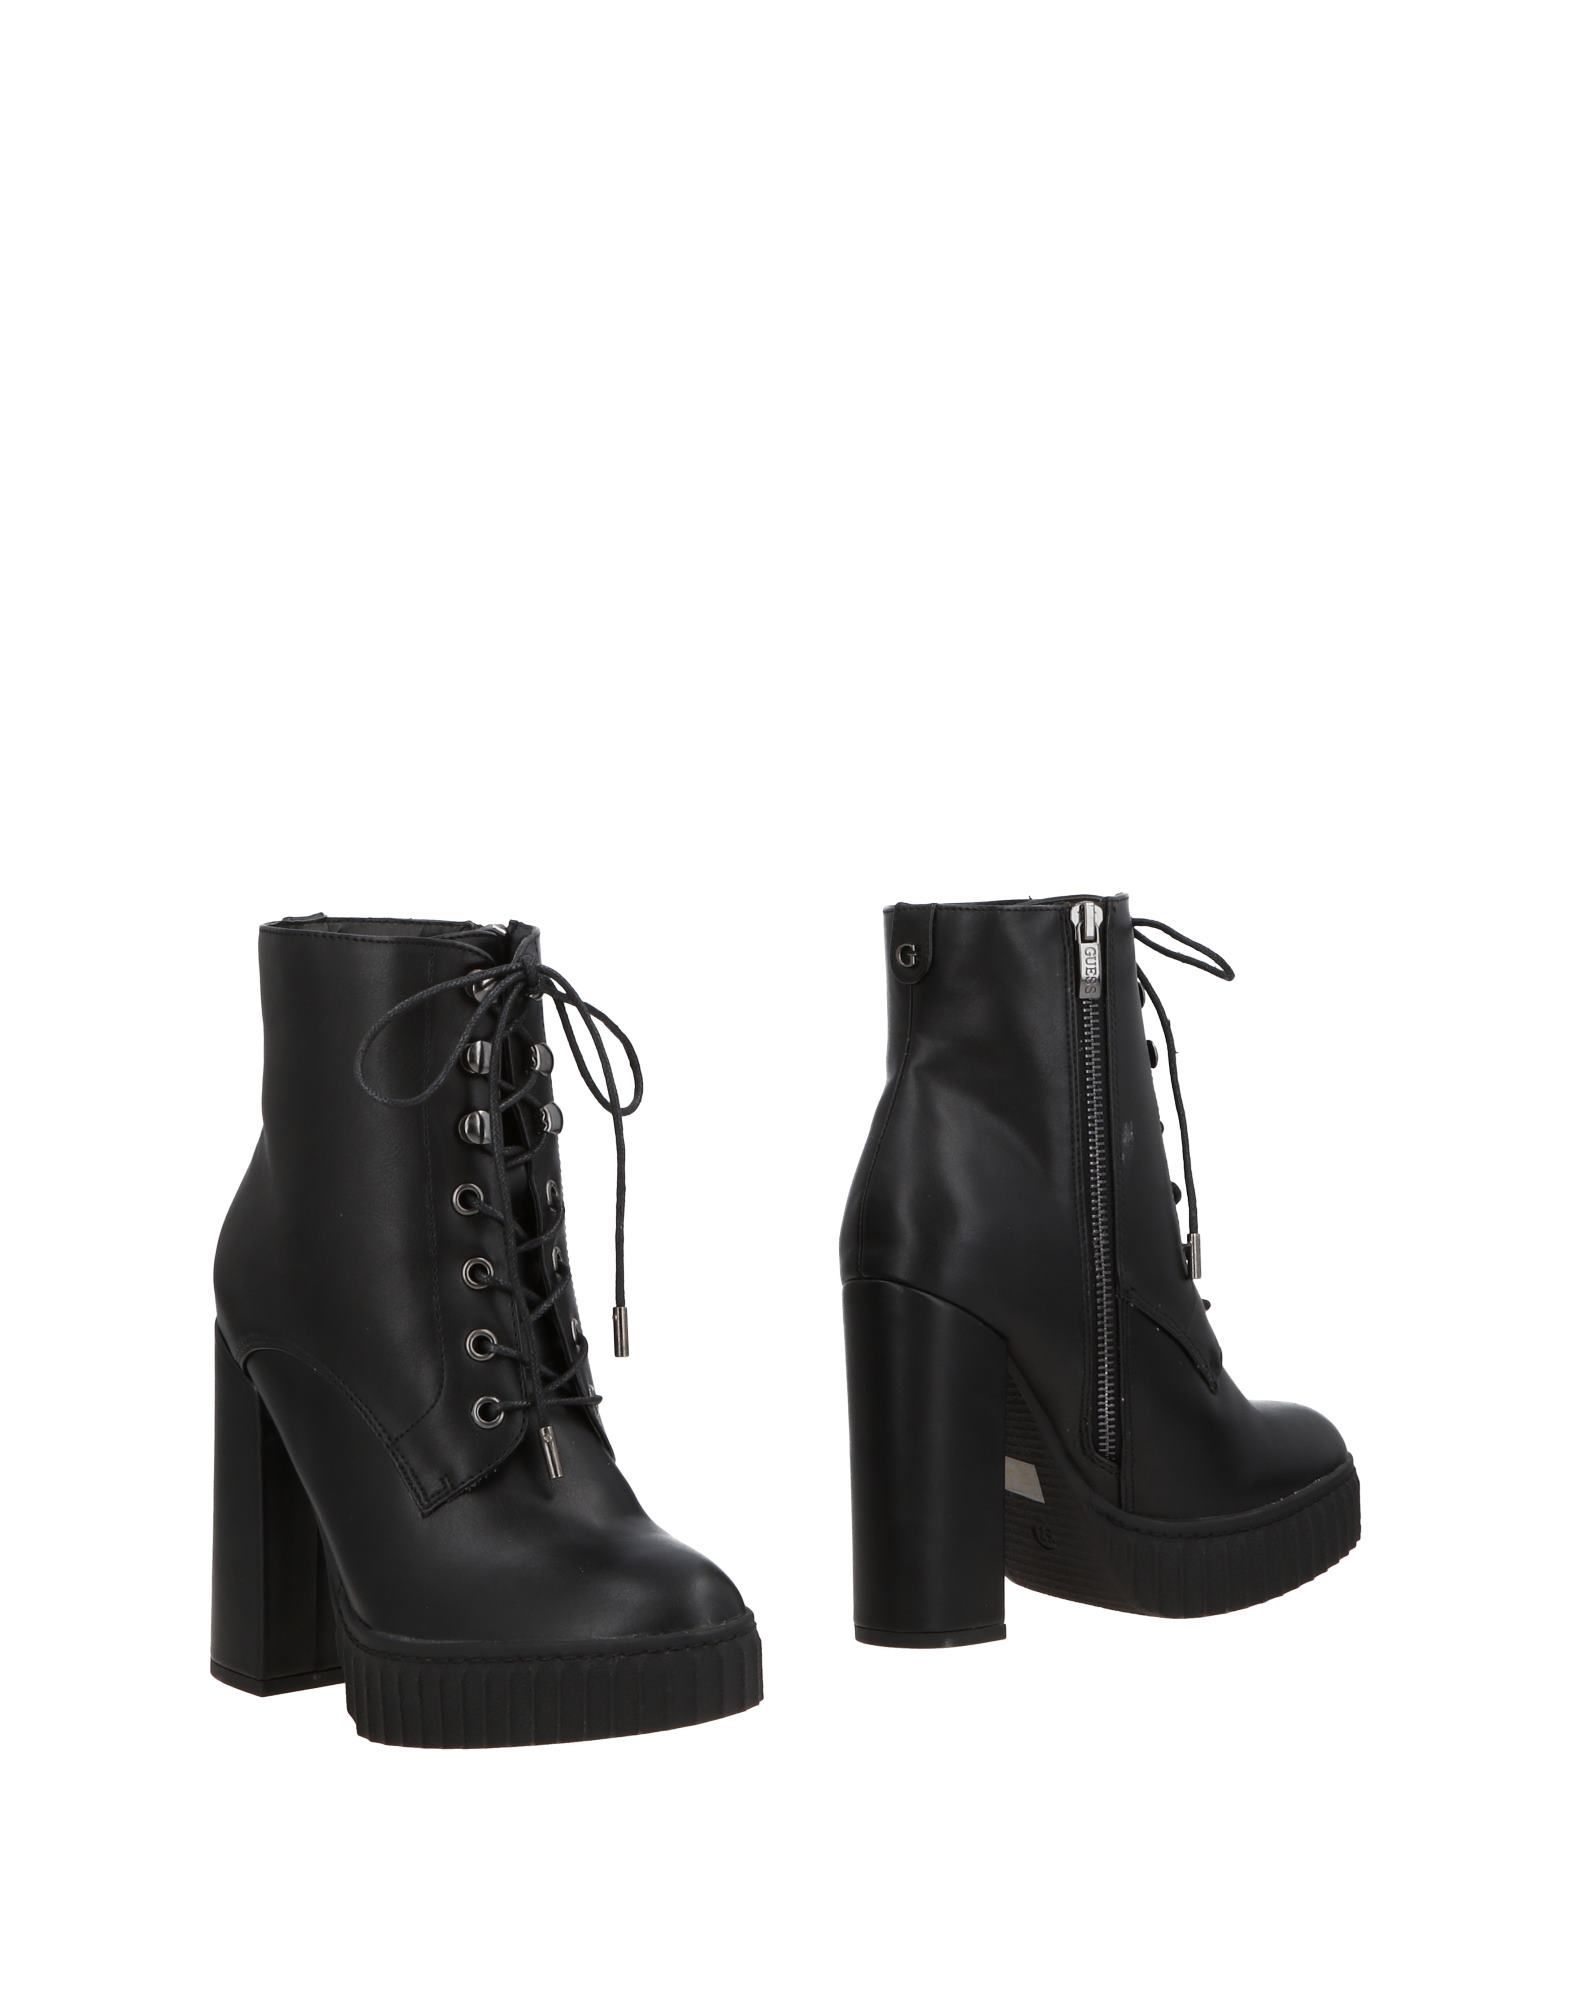 GUESS Ankle boots | YOOX (US)